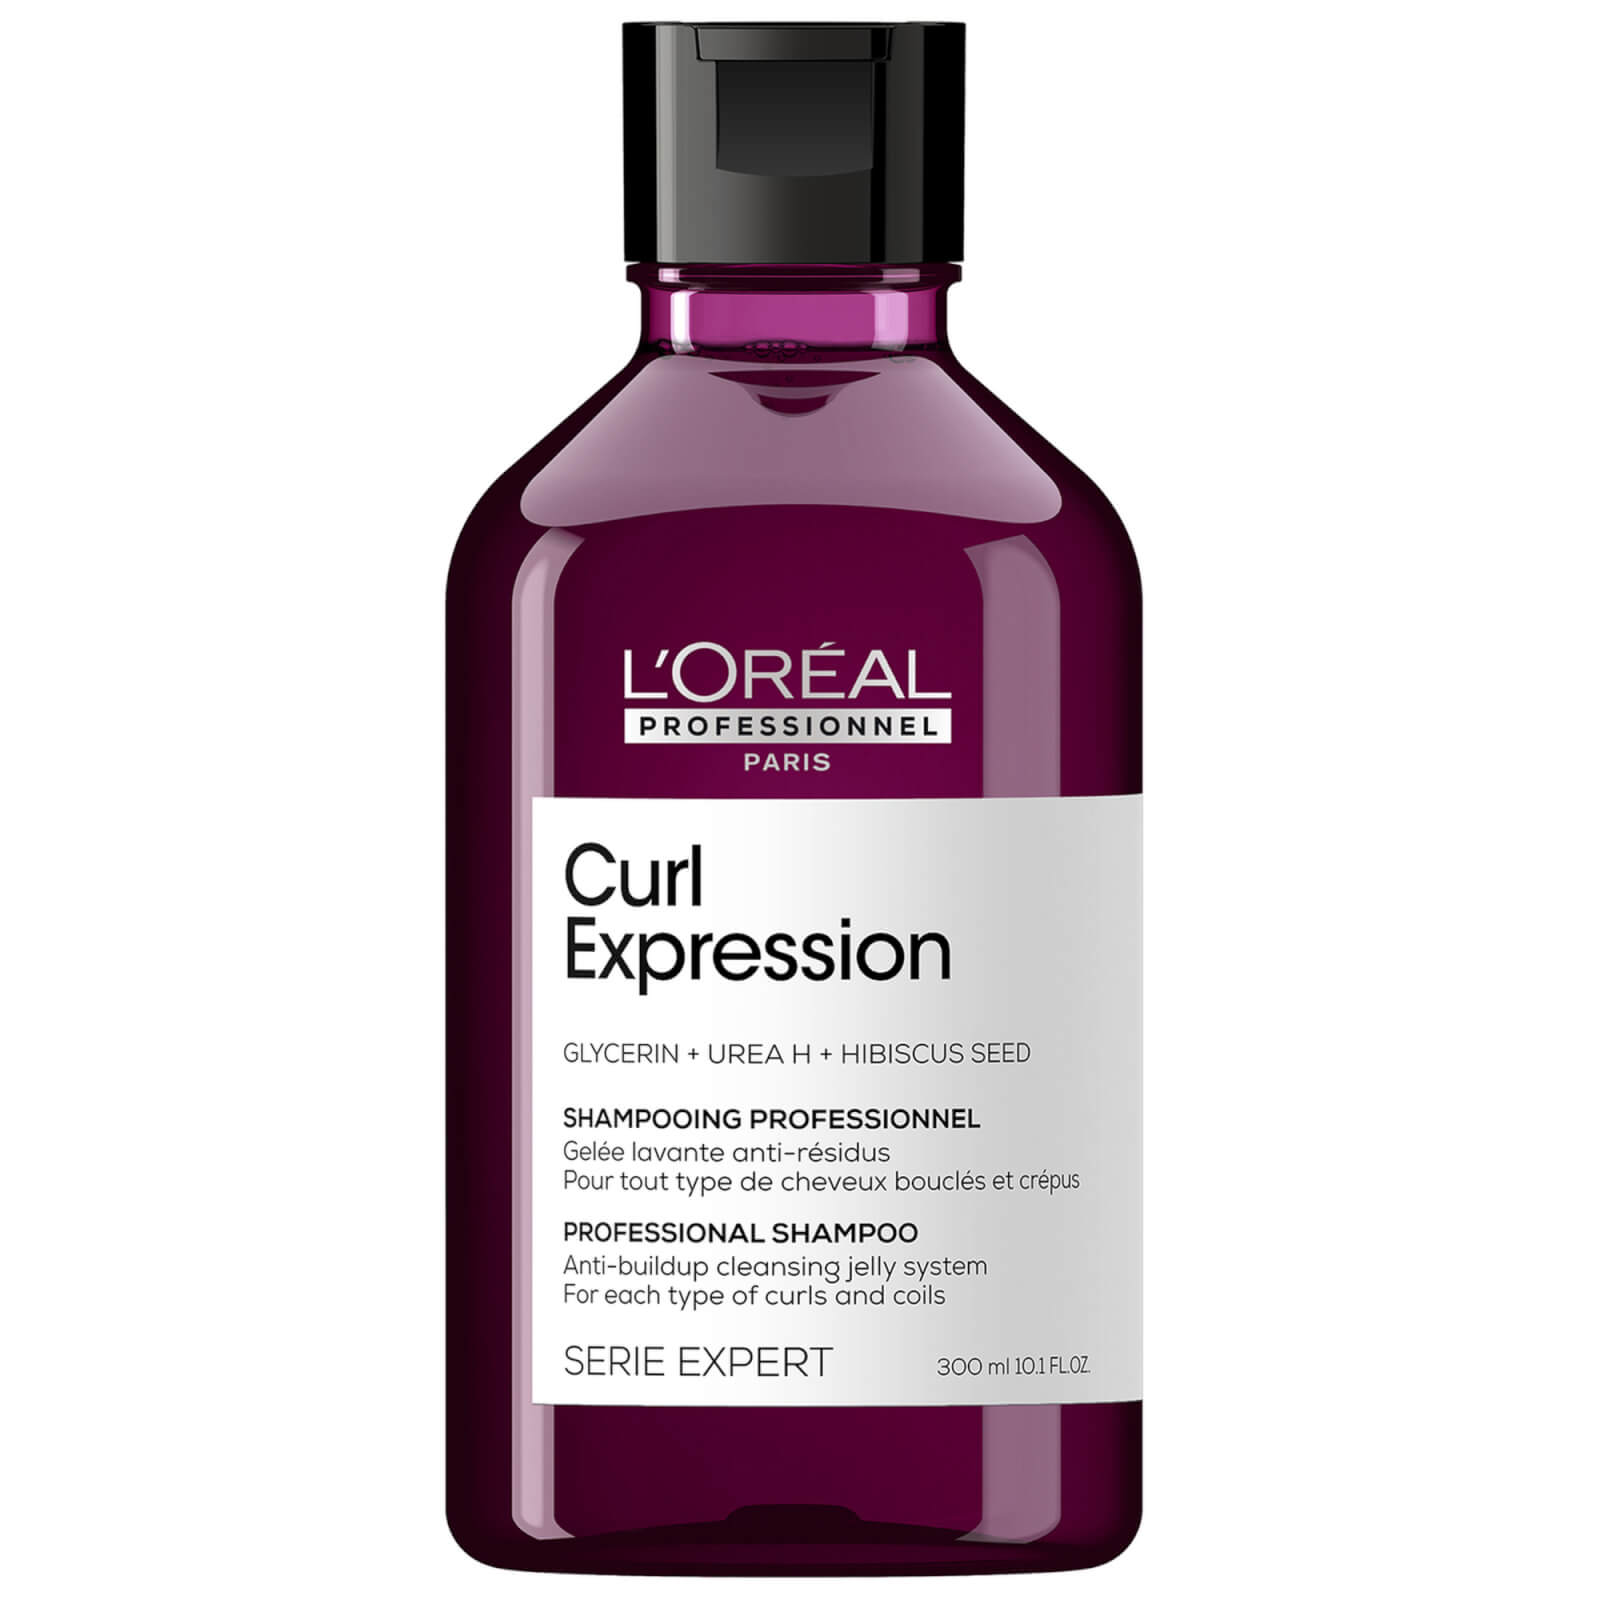 L'Oreal Professionnel Curl Expression Clarifying and Anti-Build Up Shampoo 300ml